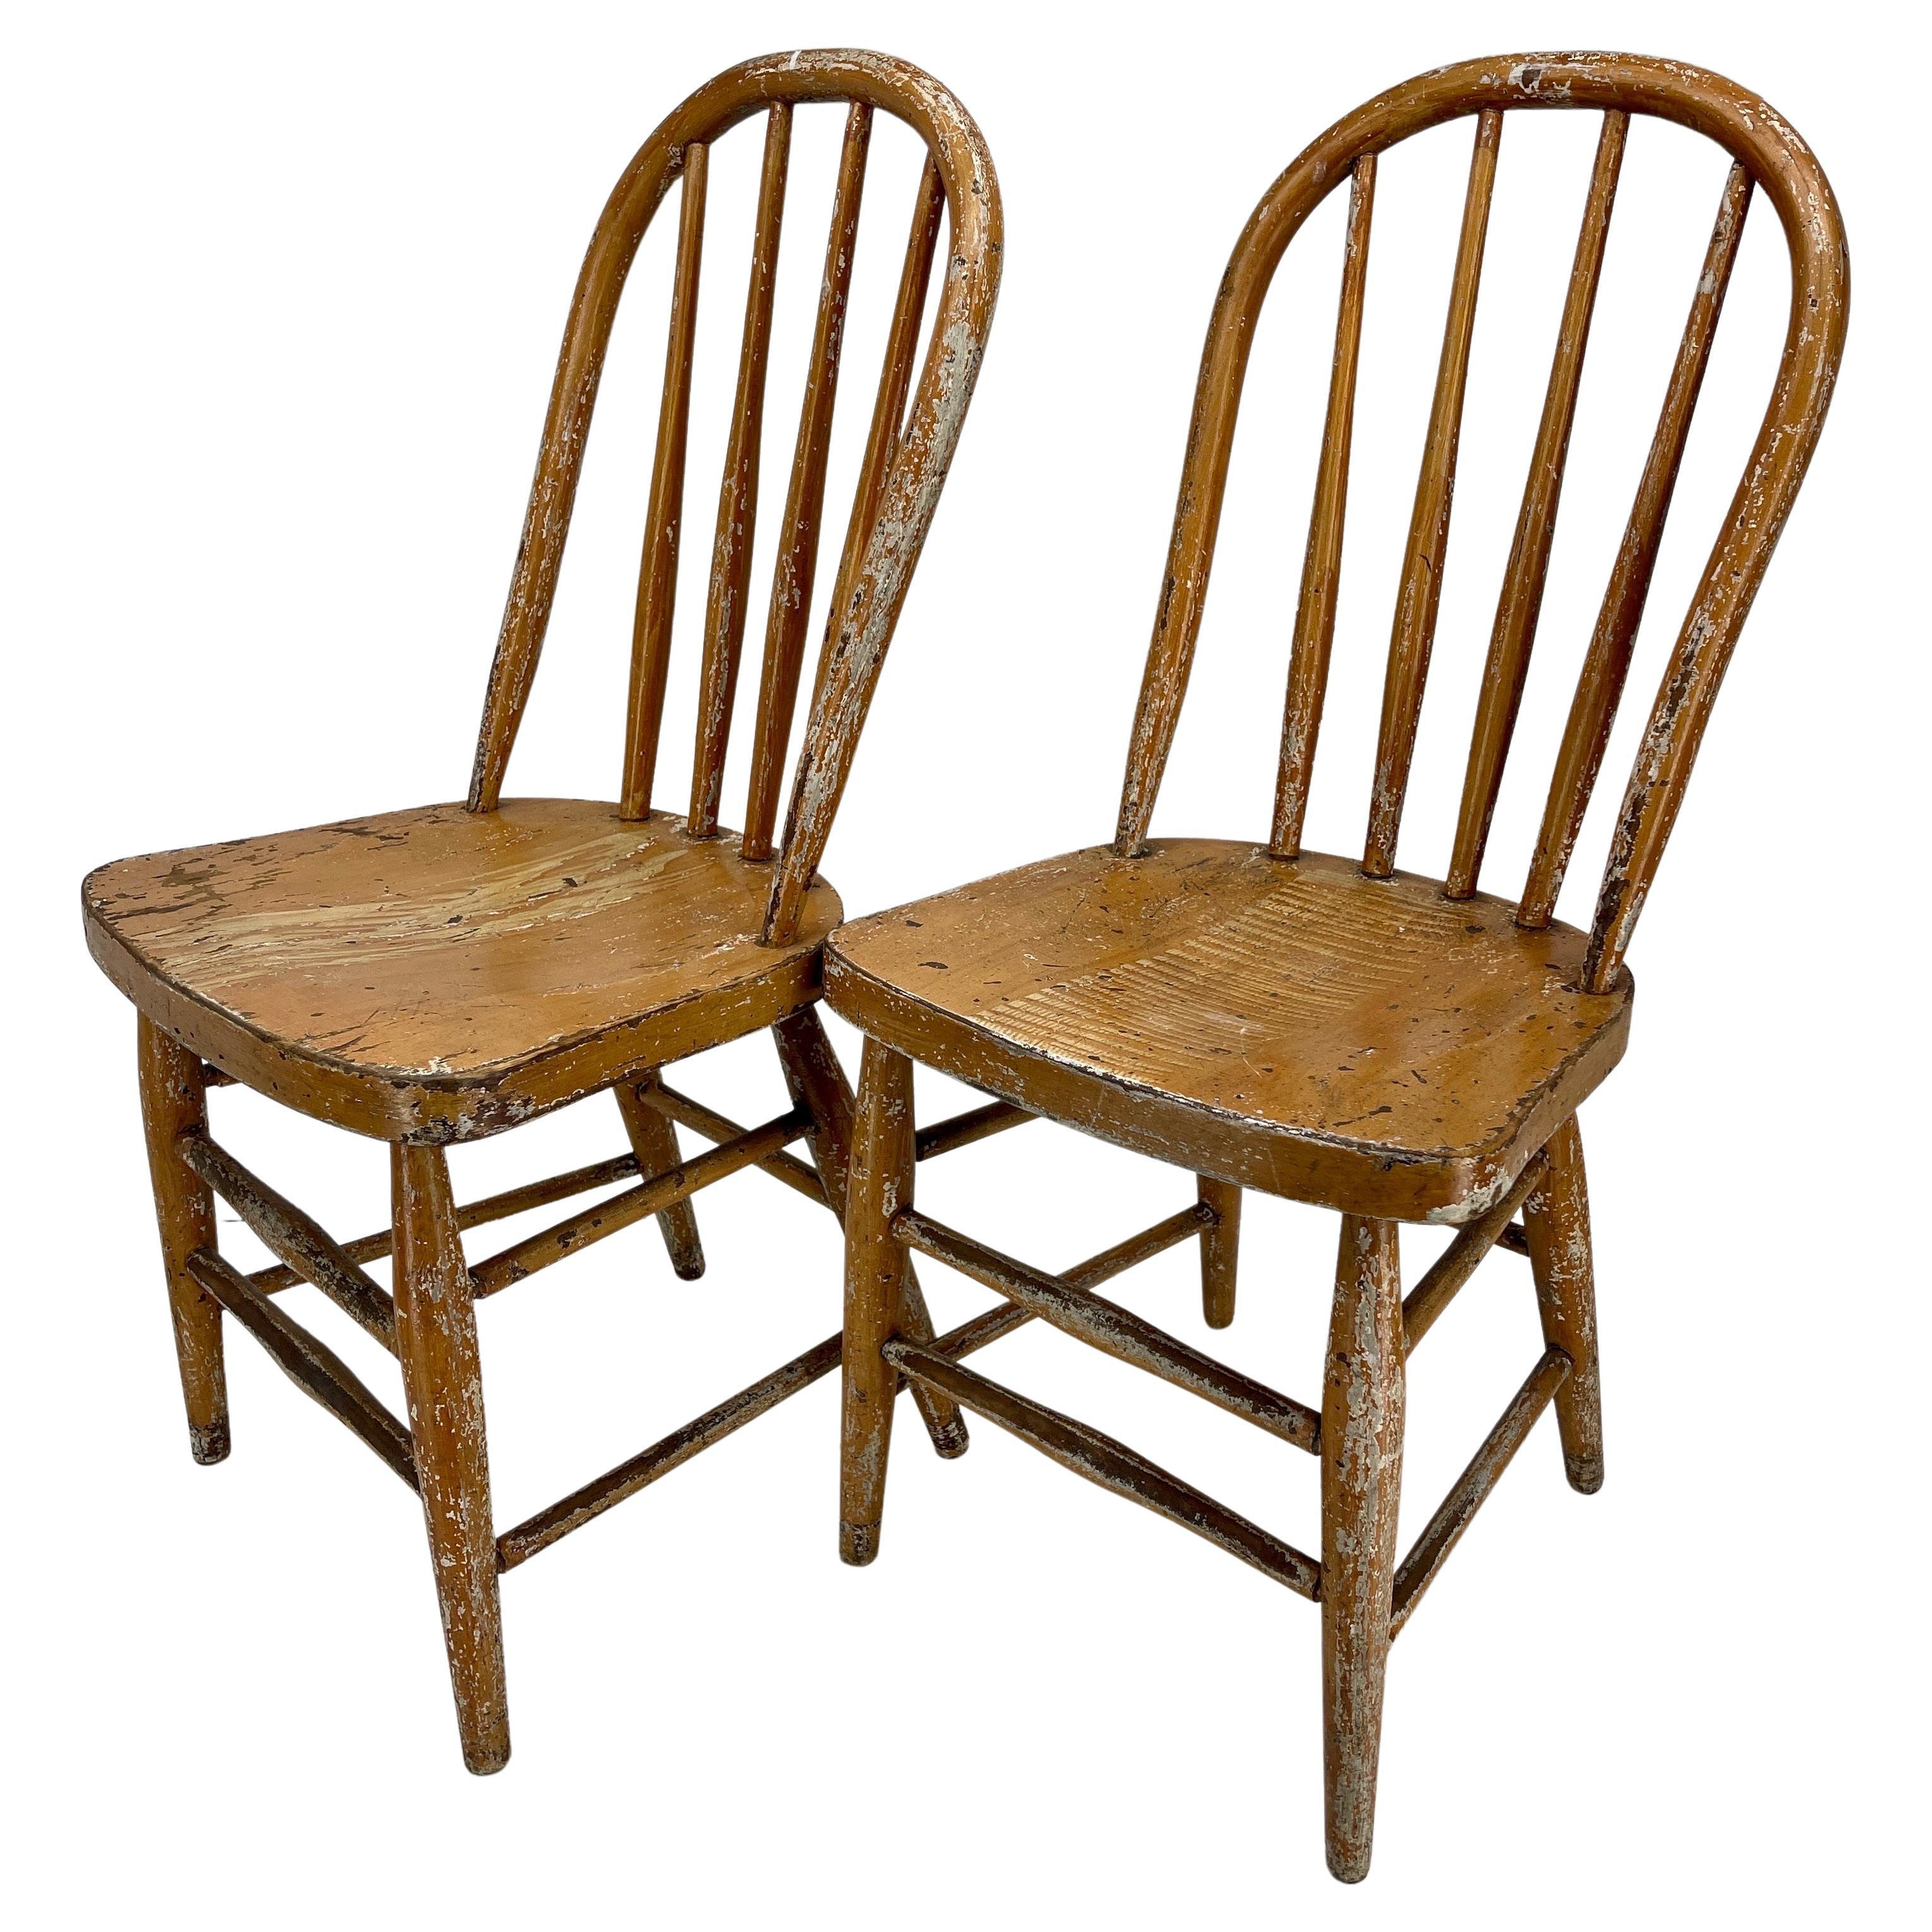 Set of Two Smaller Folk Art Chairs or Side Tables With Original Paint and Patina. 